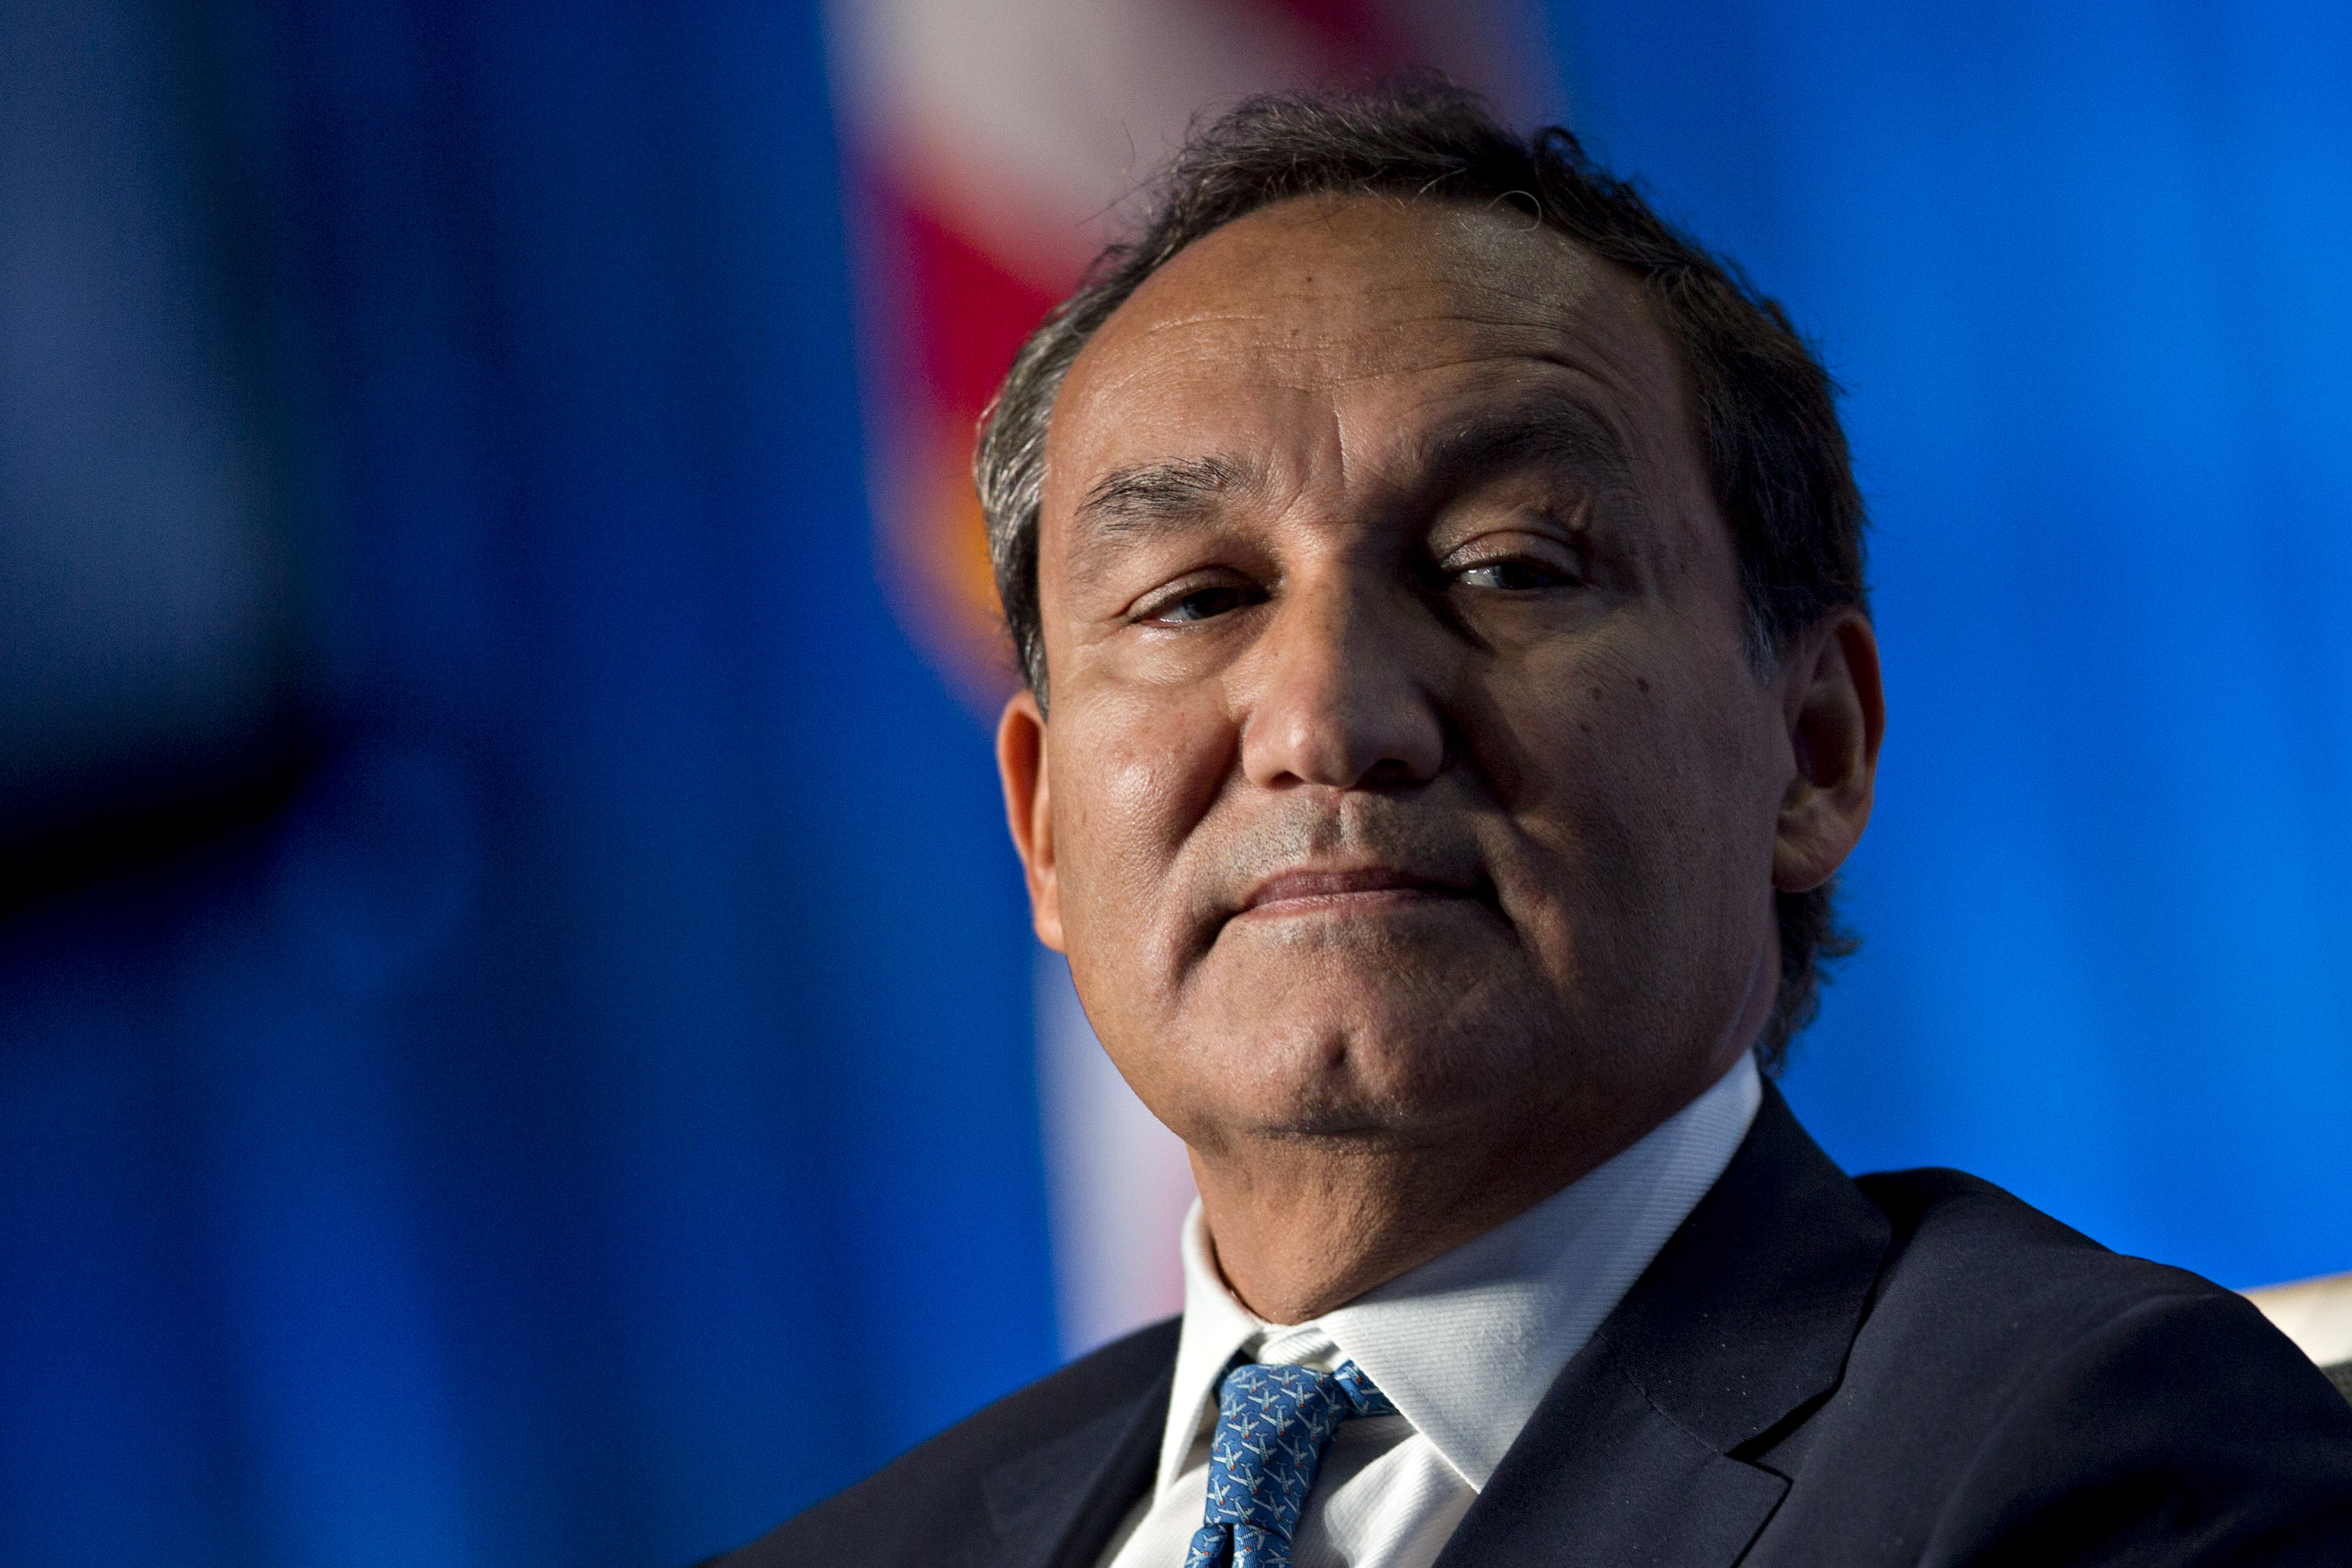 Oscar Munoz, chief executive officer of United Continental Holdings Inc., listens during a discussion at the U.S. Chamber of Commerce aviation summit in Washington, D.C., U.S., on Thursday, March 2, 2017. (Bloomberg—Bloomberg via Getty Images)